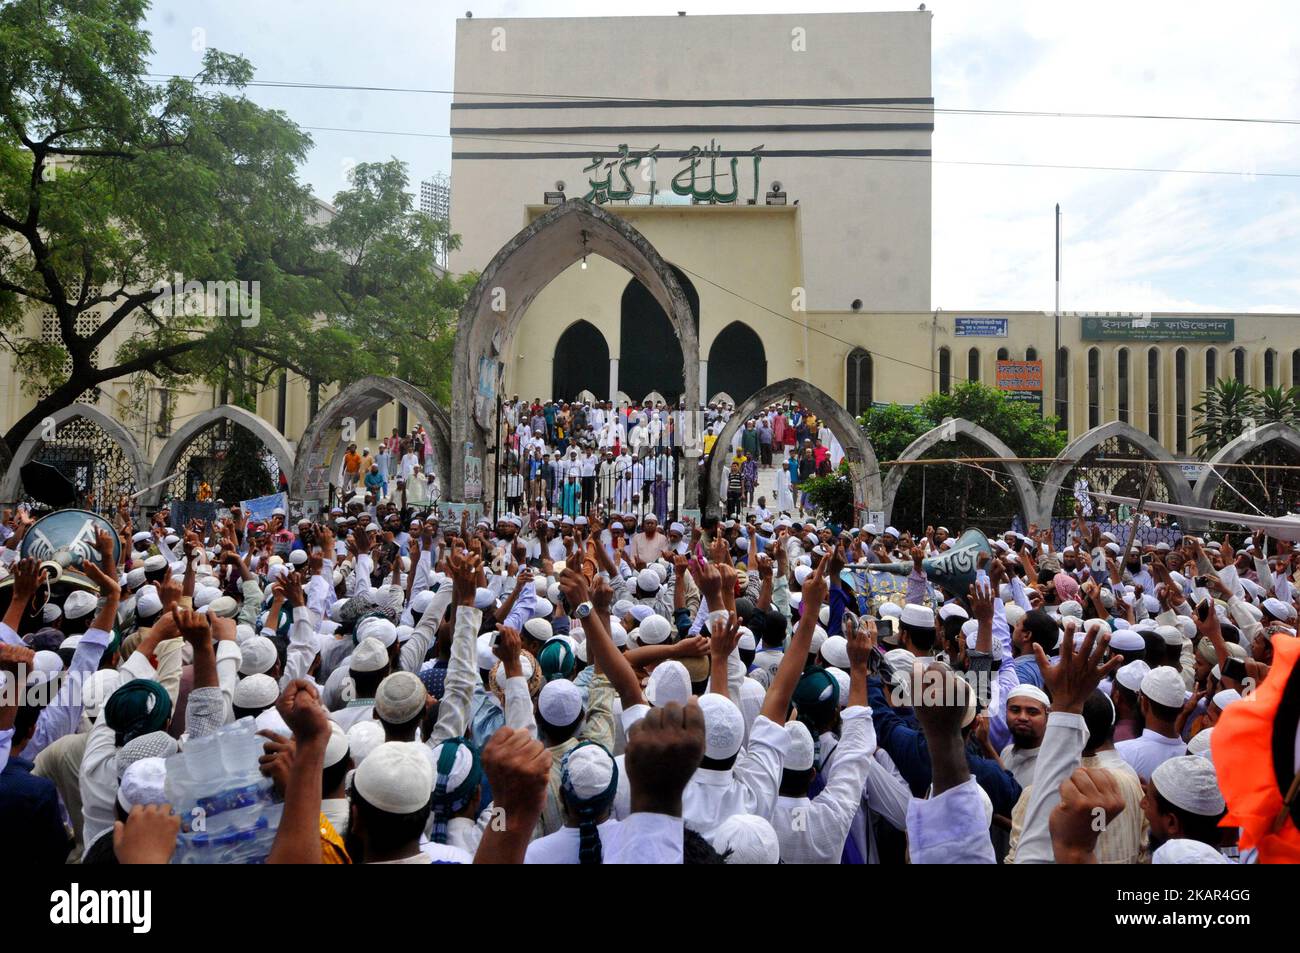 Bangladeshi Muslims protests at Baitul Makaram National Mosque in Dhaka, Bangladesh on September 8, 2017, demanding an end to the persecution of Rohingyas in Myanmar. Ganajagaran Mancha, a platform of youths in Bangladesh that campaigns for highest punishment for those found guilty in committing genocide and war crimes in the country's liberation war in 1971, came out on Friday demanding an end of genocide against Rohingyas in Myanmar. (Photo by Sony Ramany/NurPhoto) Stock Photo